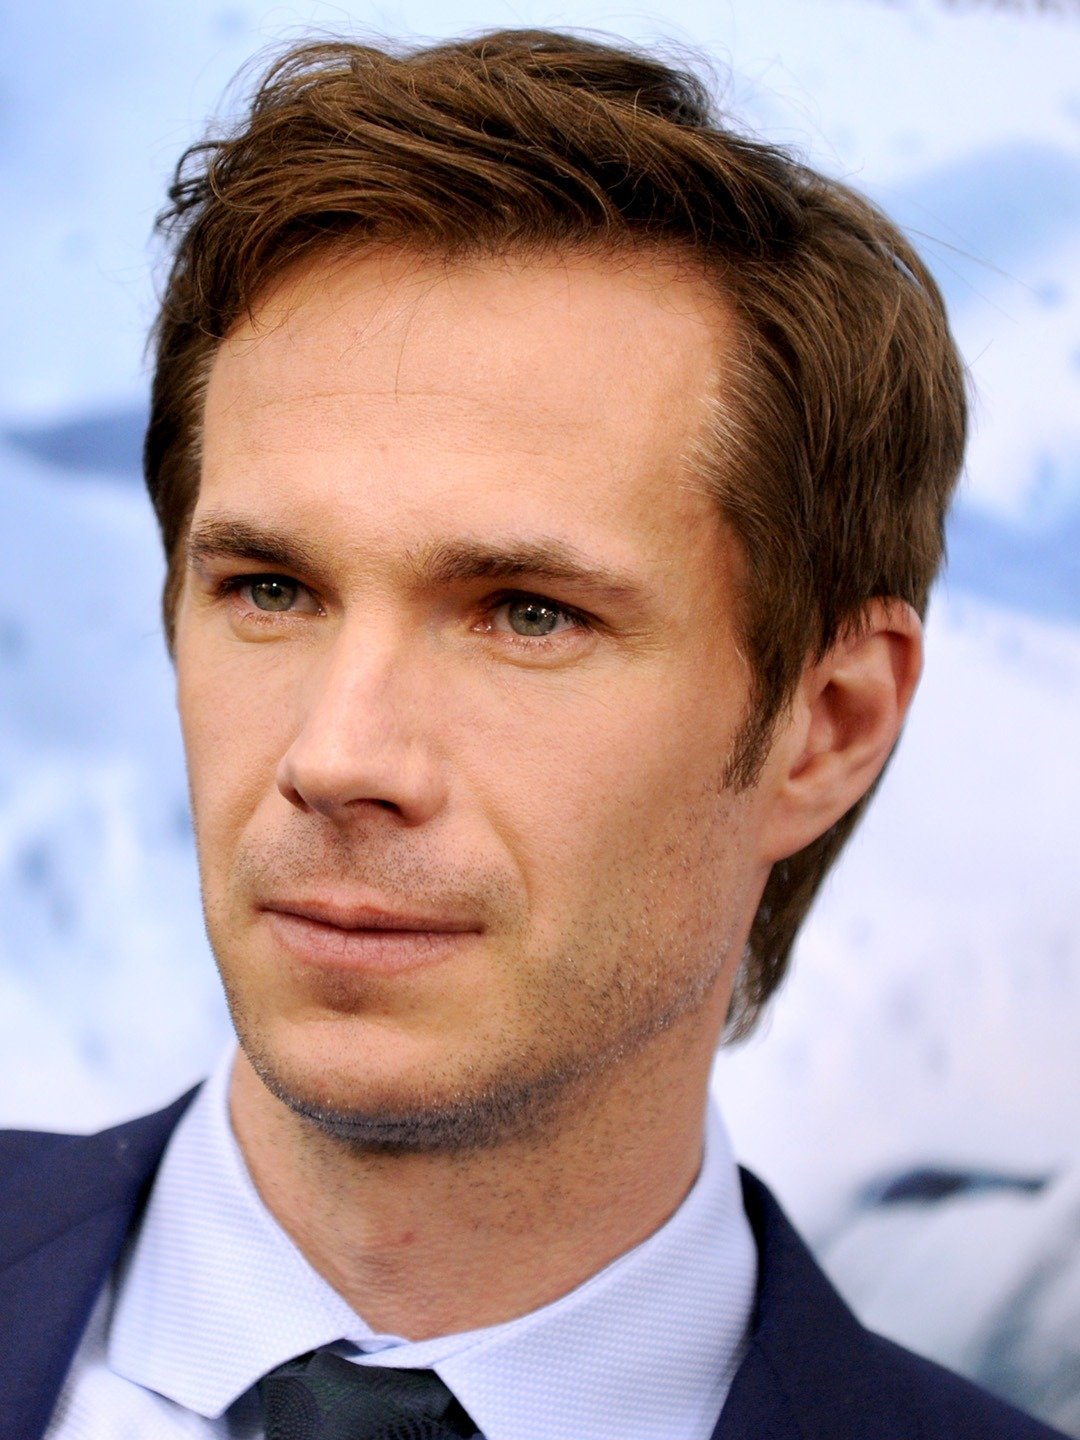 How tall is James D'Arcy?